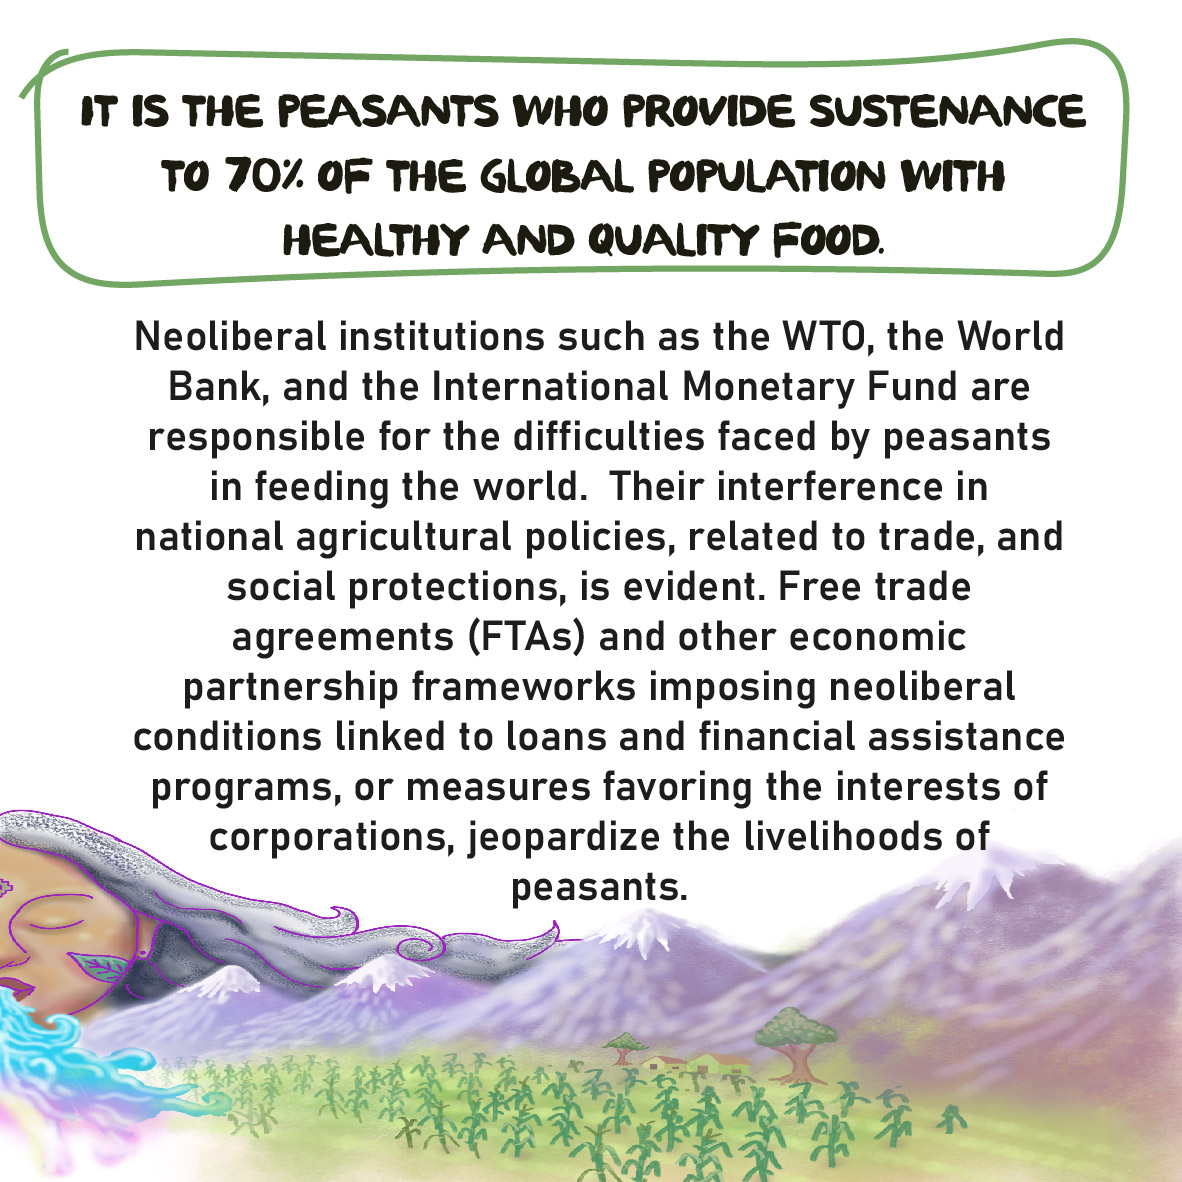 📢 Join us on our action day this #17April, International Day of #PeasantStruggles! Download our communication kit, organize demonstrations, participate in solidarity actions, and defend Food Sovereignty comms.viacampesina.org/s/dRRbpYzRkkwG… #IncomeForFarmers #CeaseFire